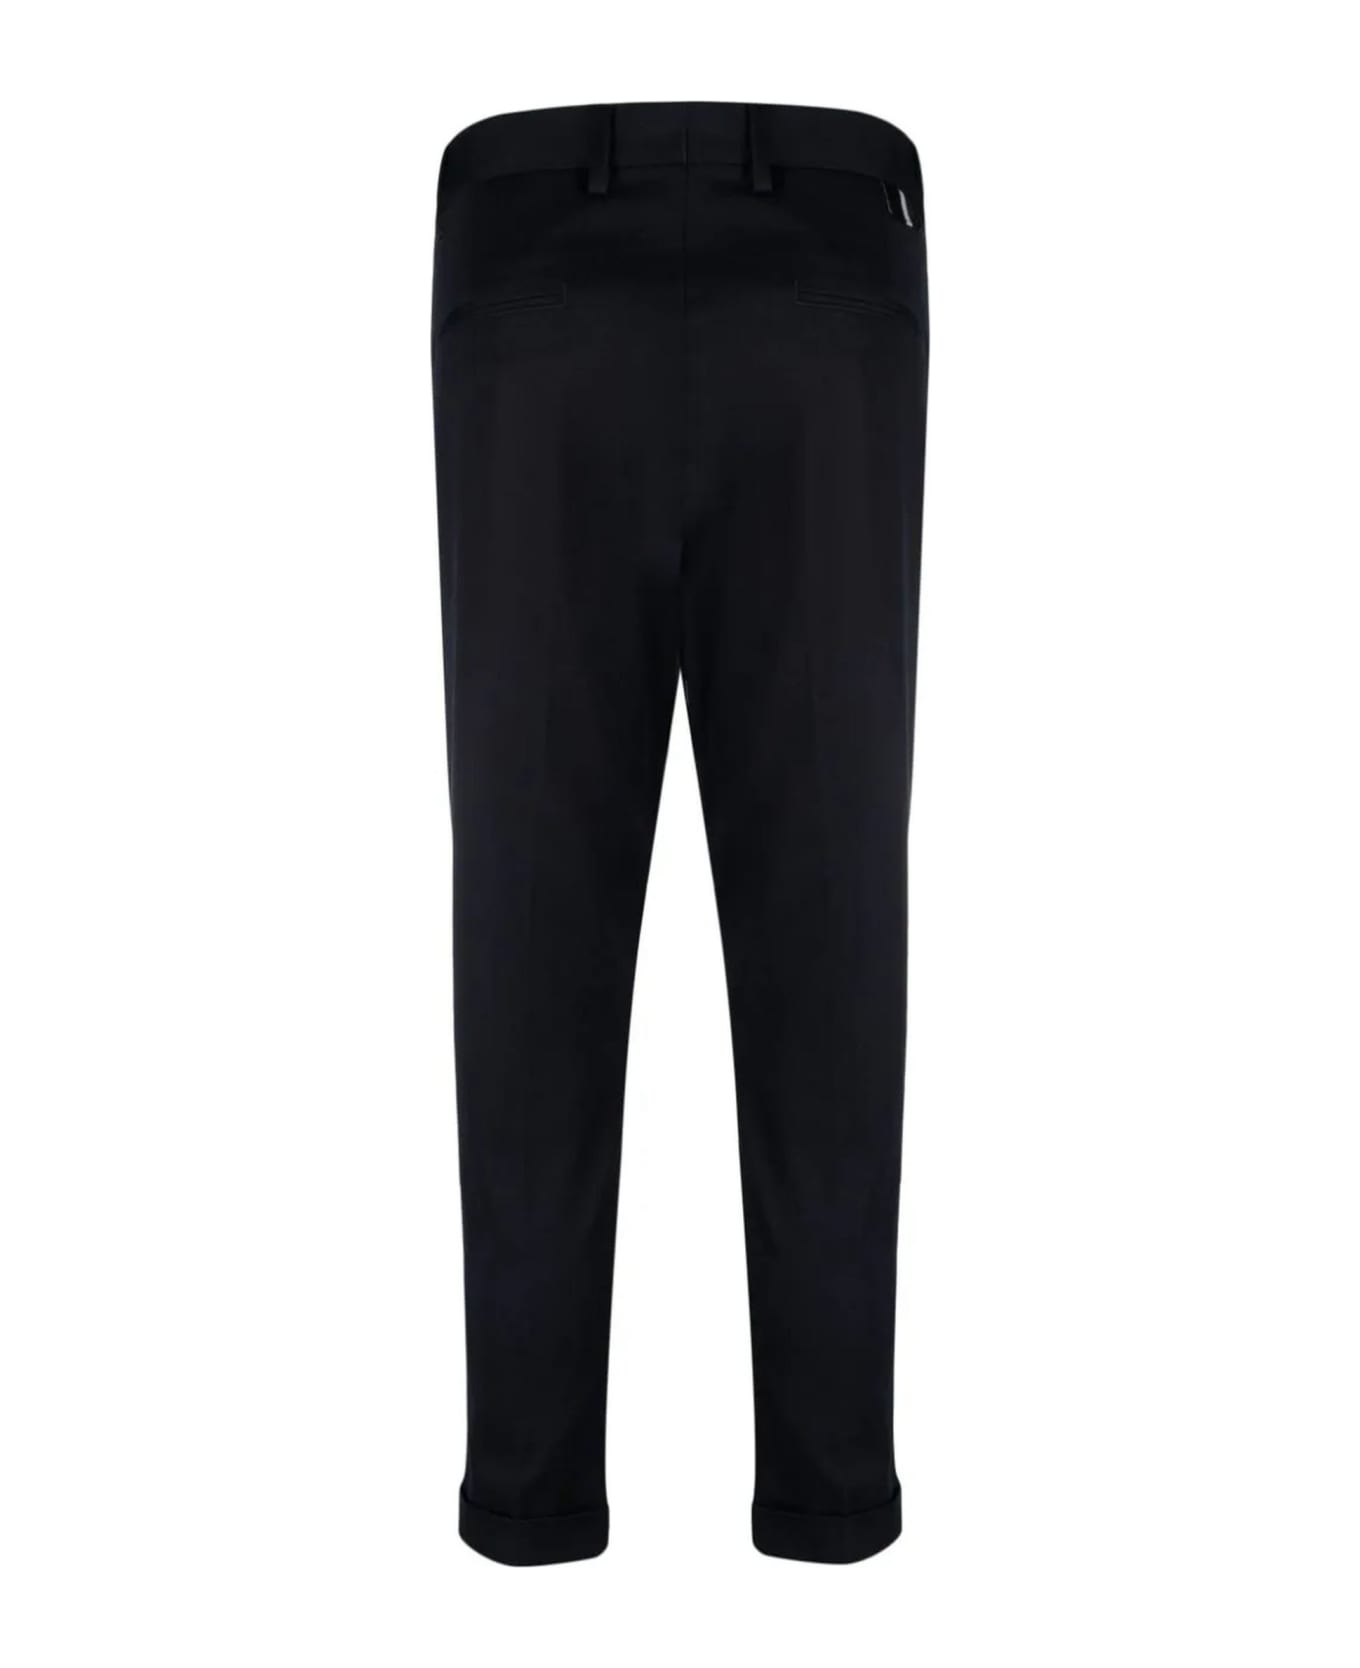 Low Brand Navy Blue Cotton Chino Trousers